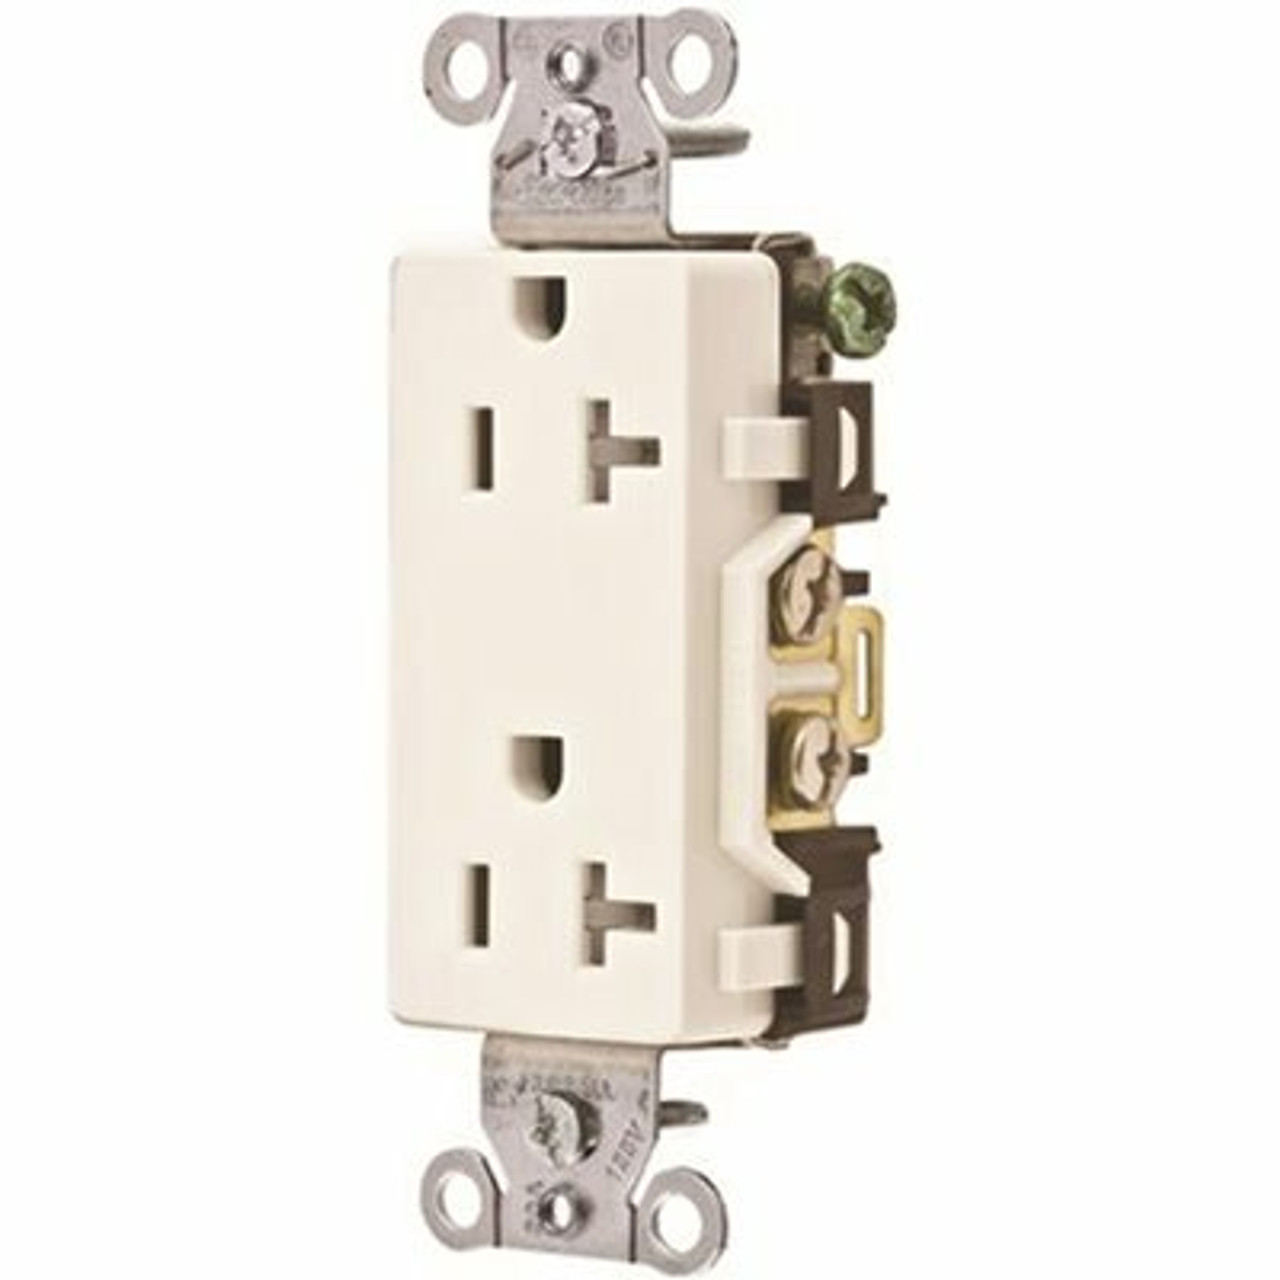 Hubbell Wiring 20 Amp Hubbell Commercial Grade Tamper Resistant Decorator Duplex Receptacle, White